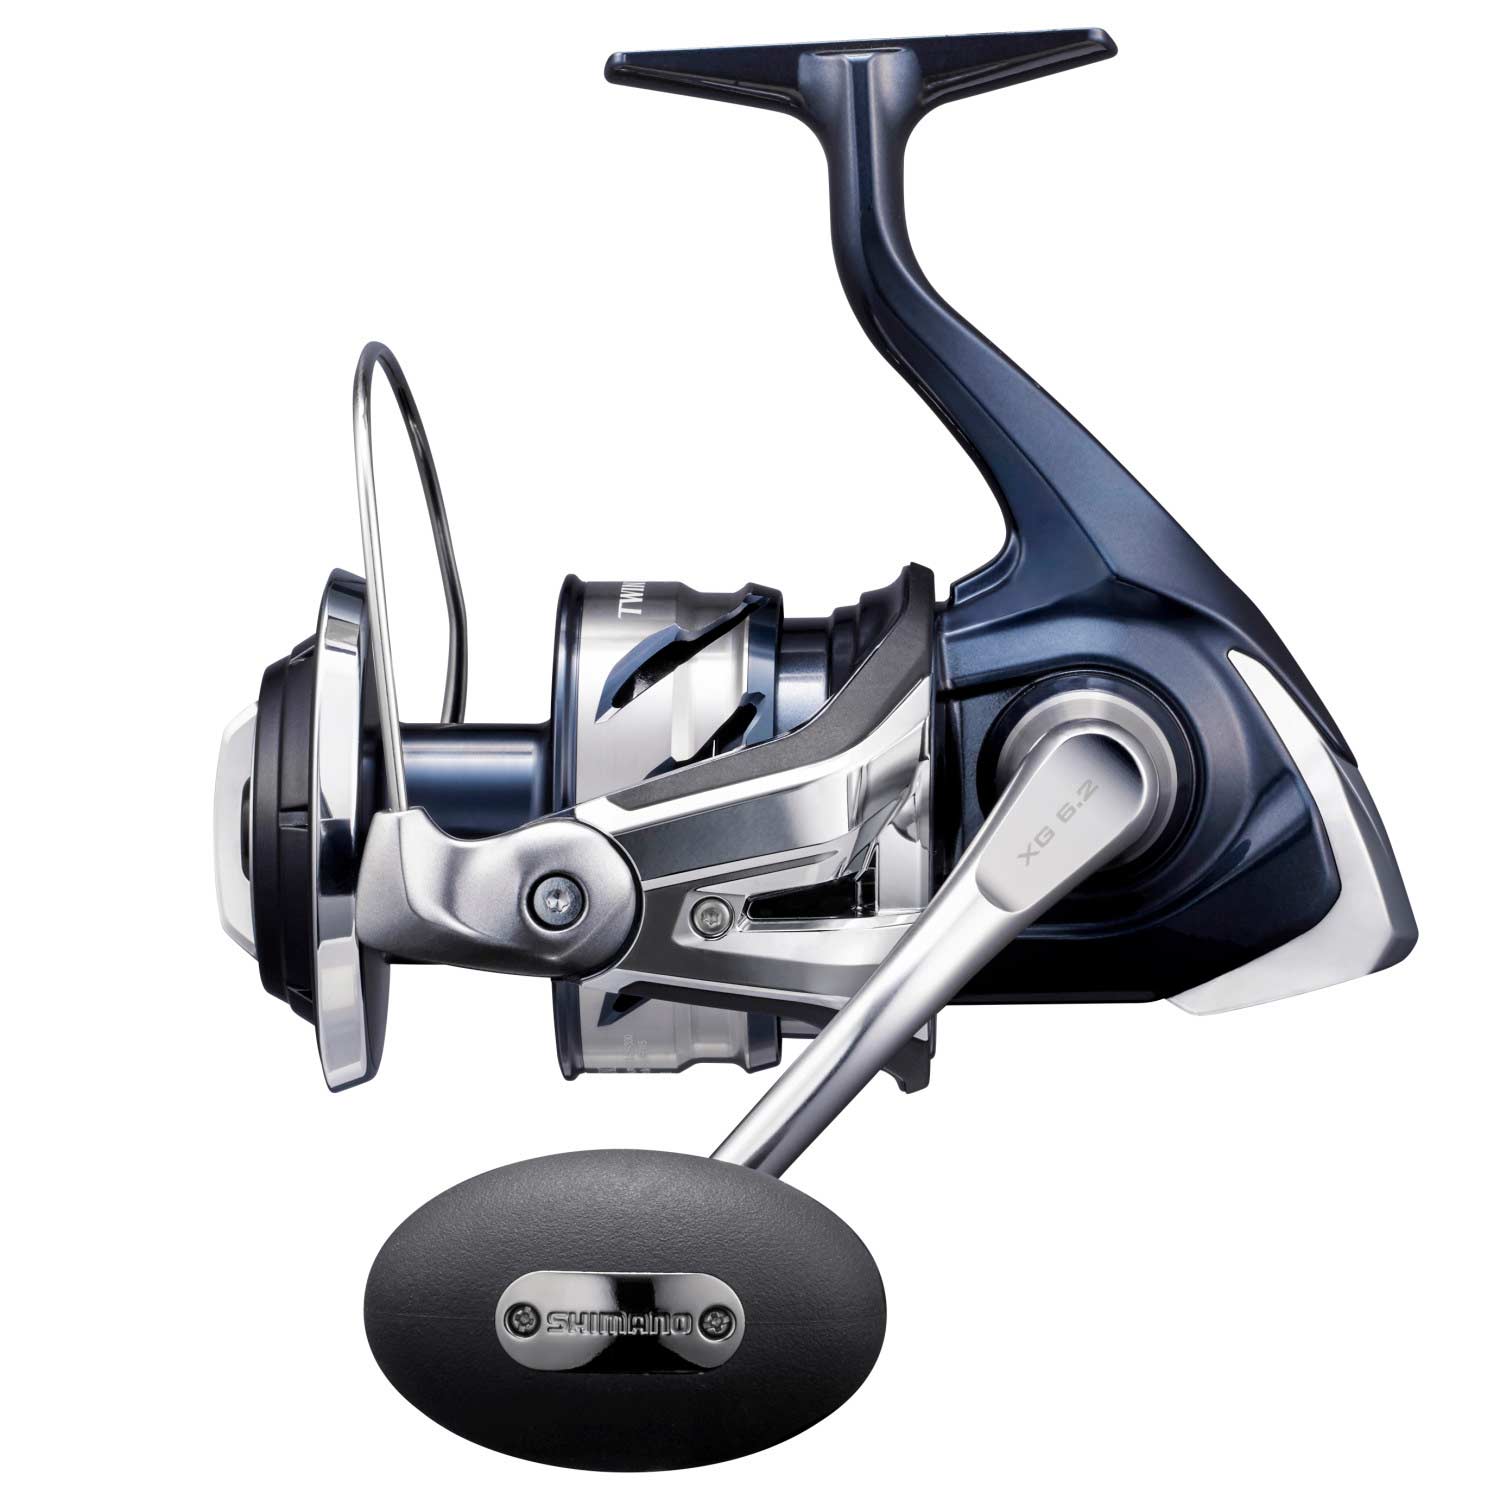 Twinpower SW 8000HG C Spinning Reel